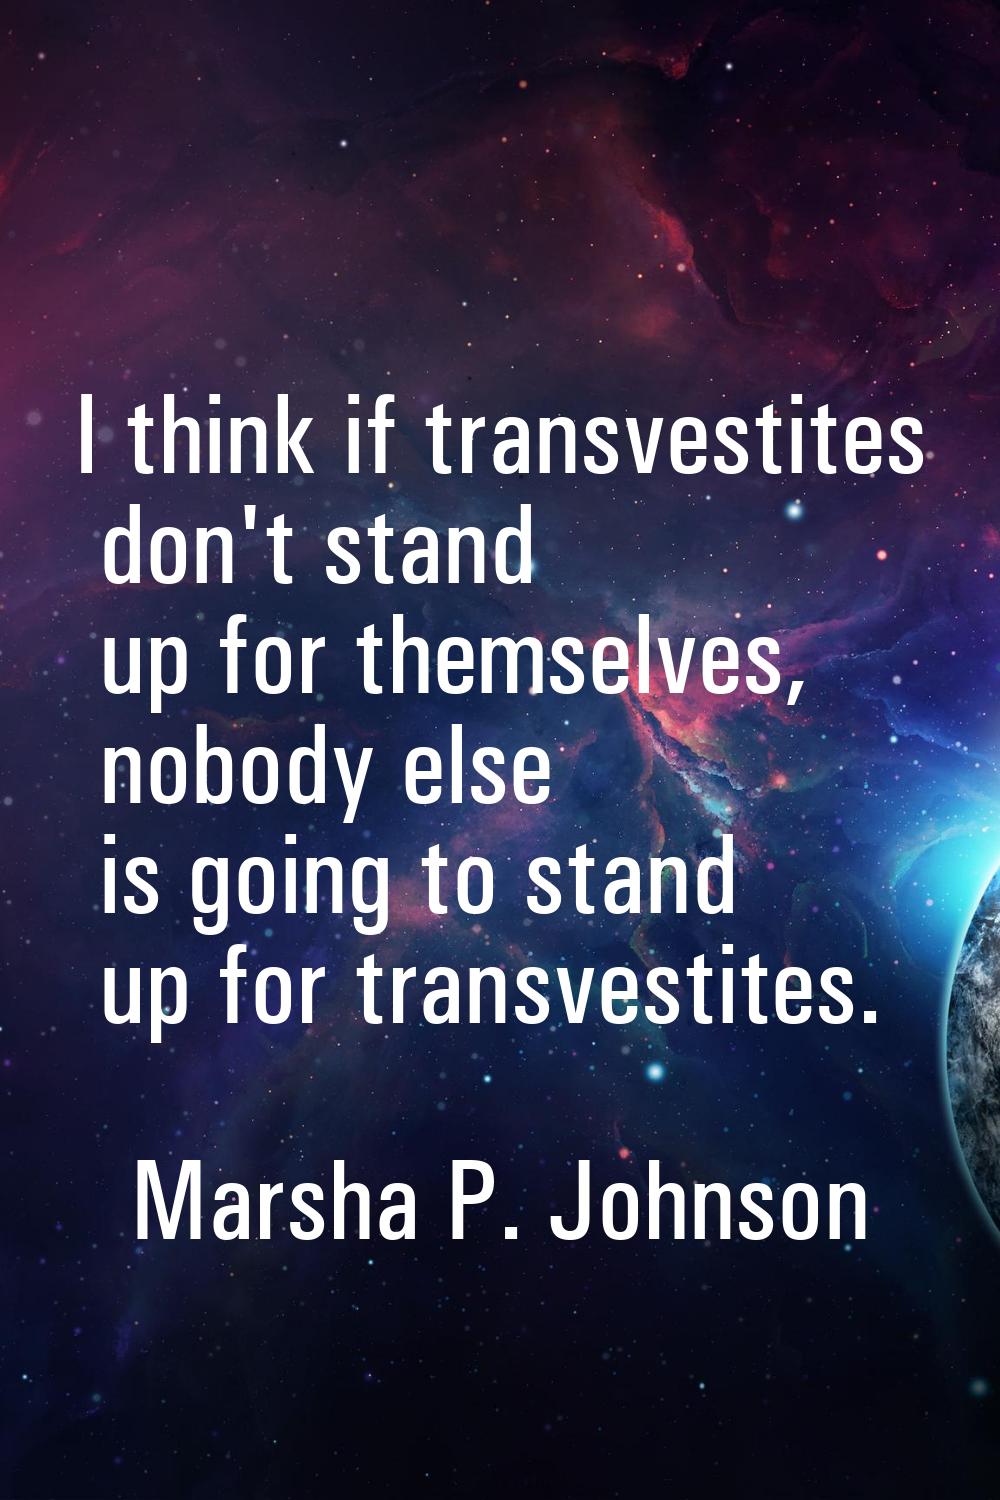 I think if transvestites don't stand up for themselves, nobody else is going to stand up for transv